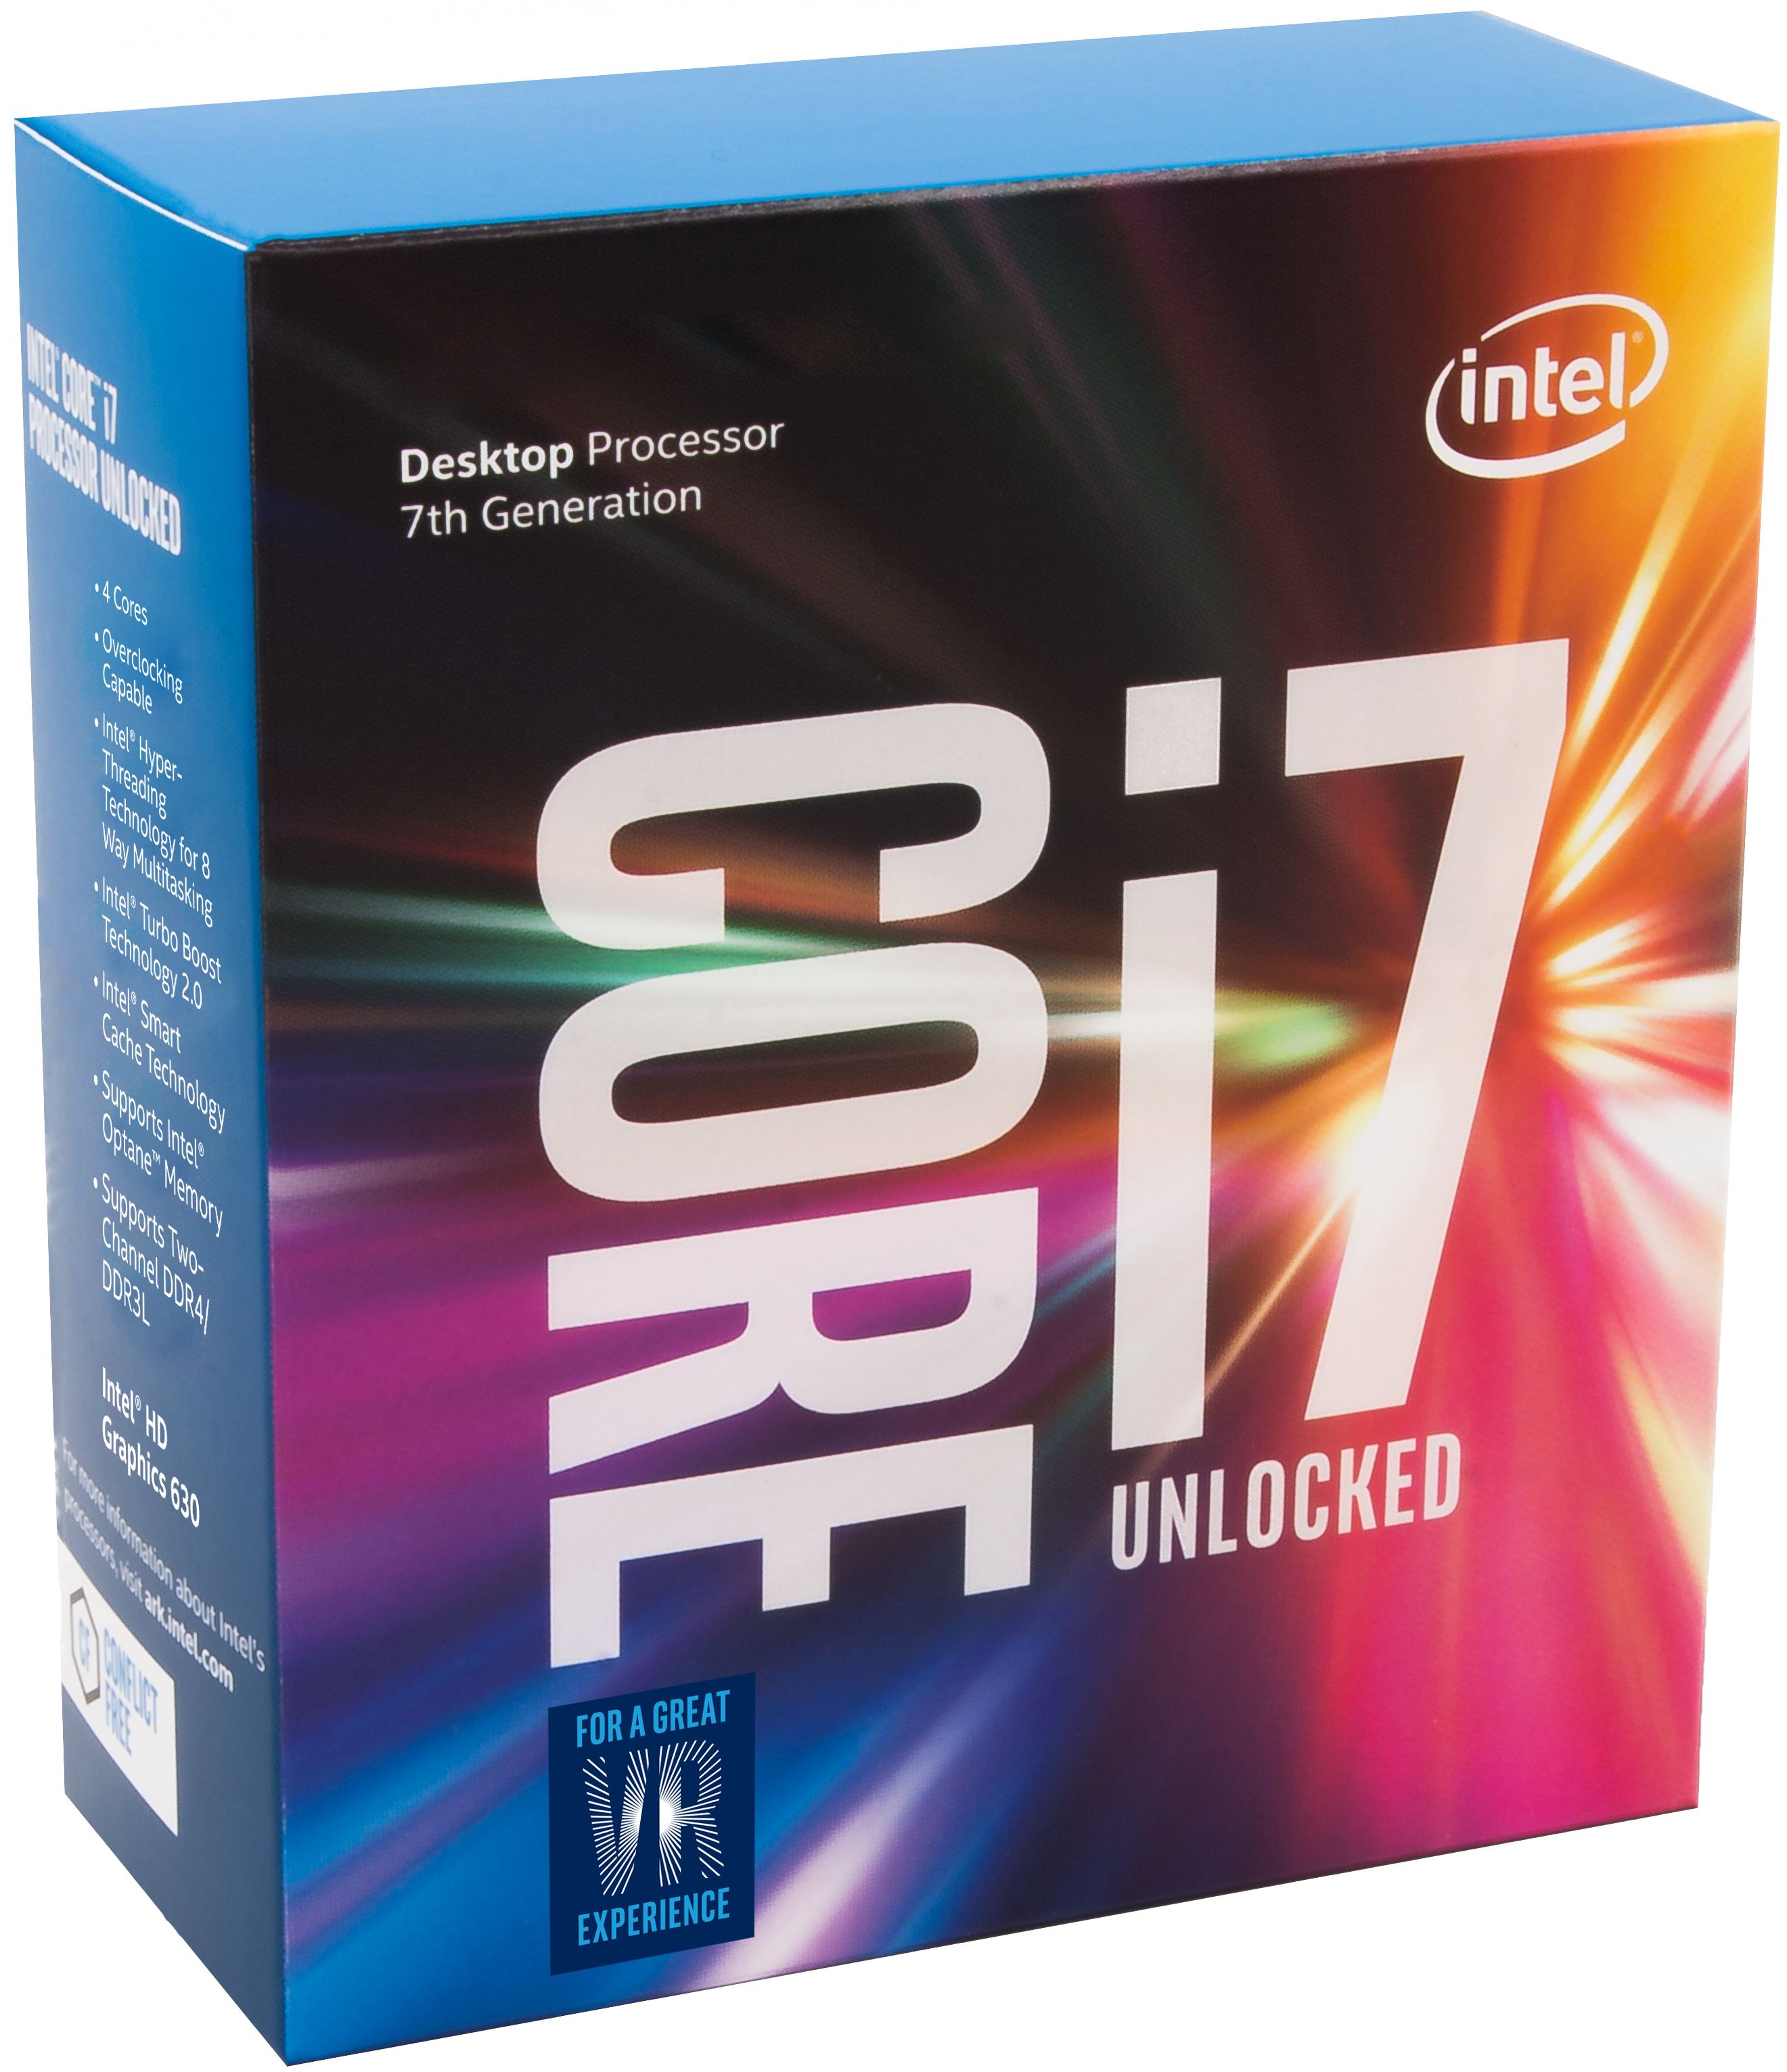 Intel Core i7-7700K, 4x 4.20GHz, boxed without cooler